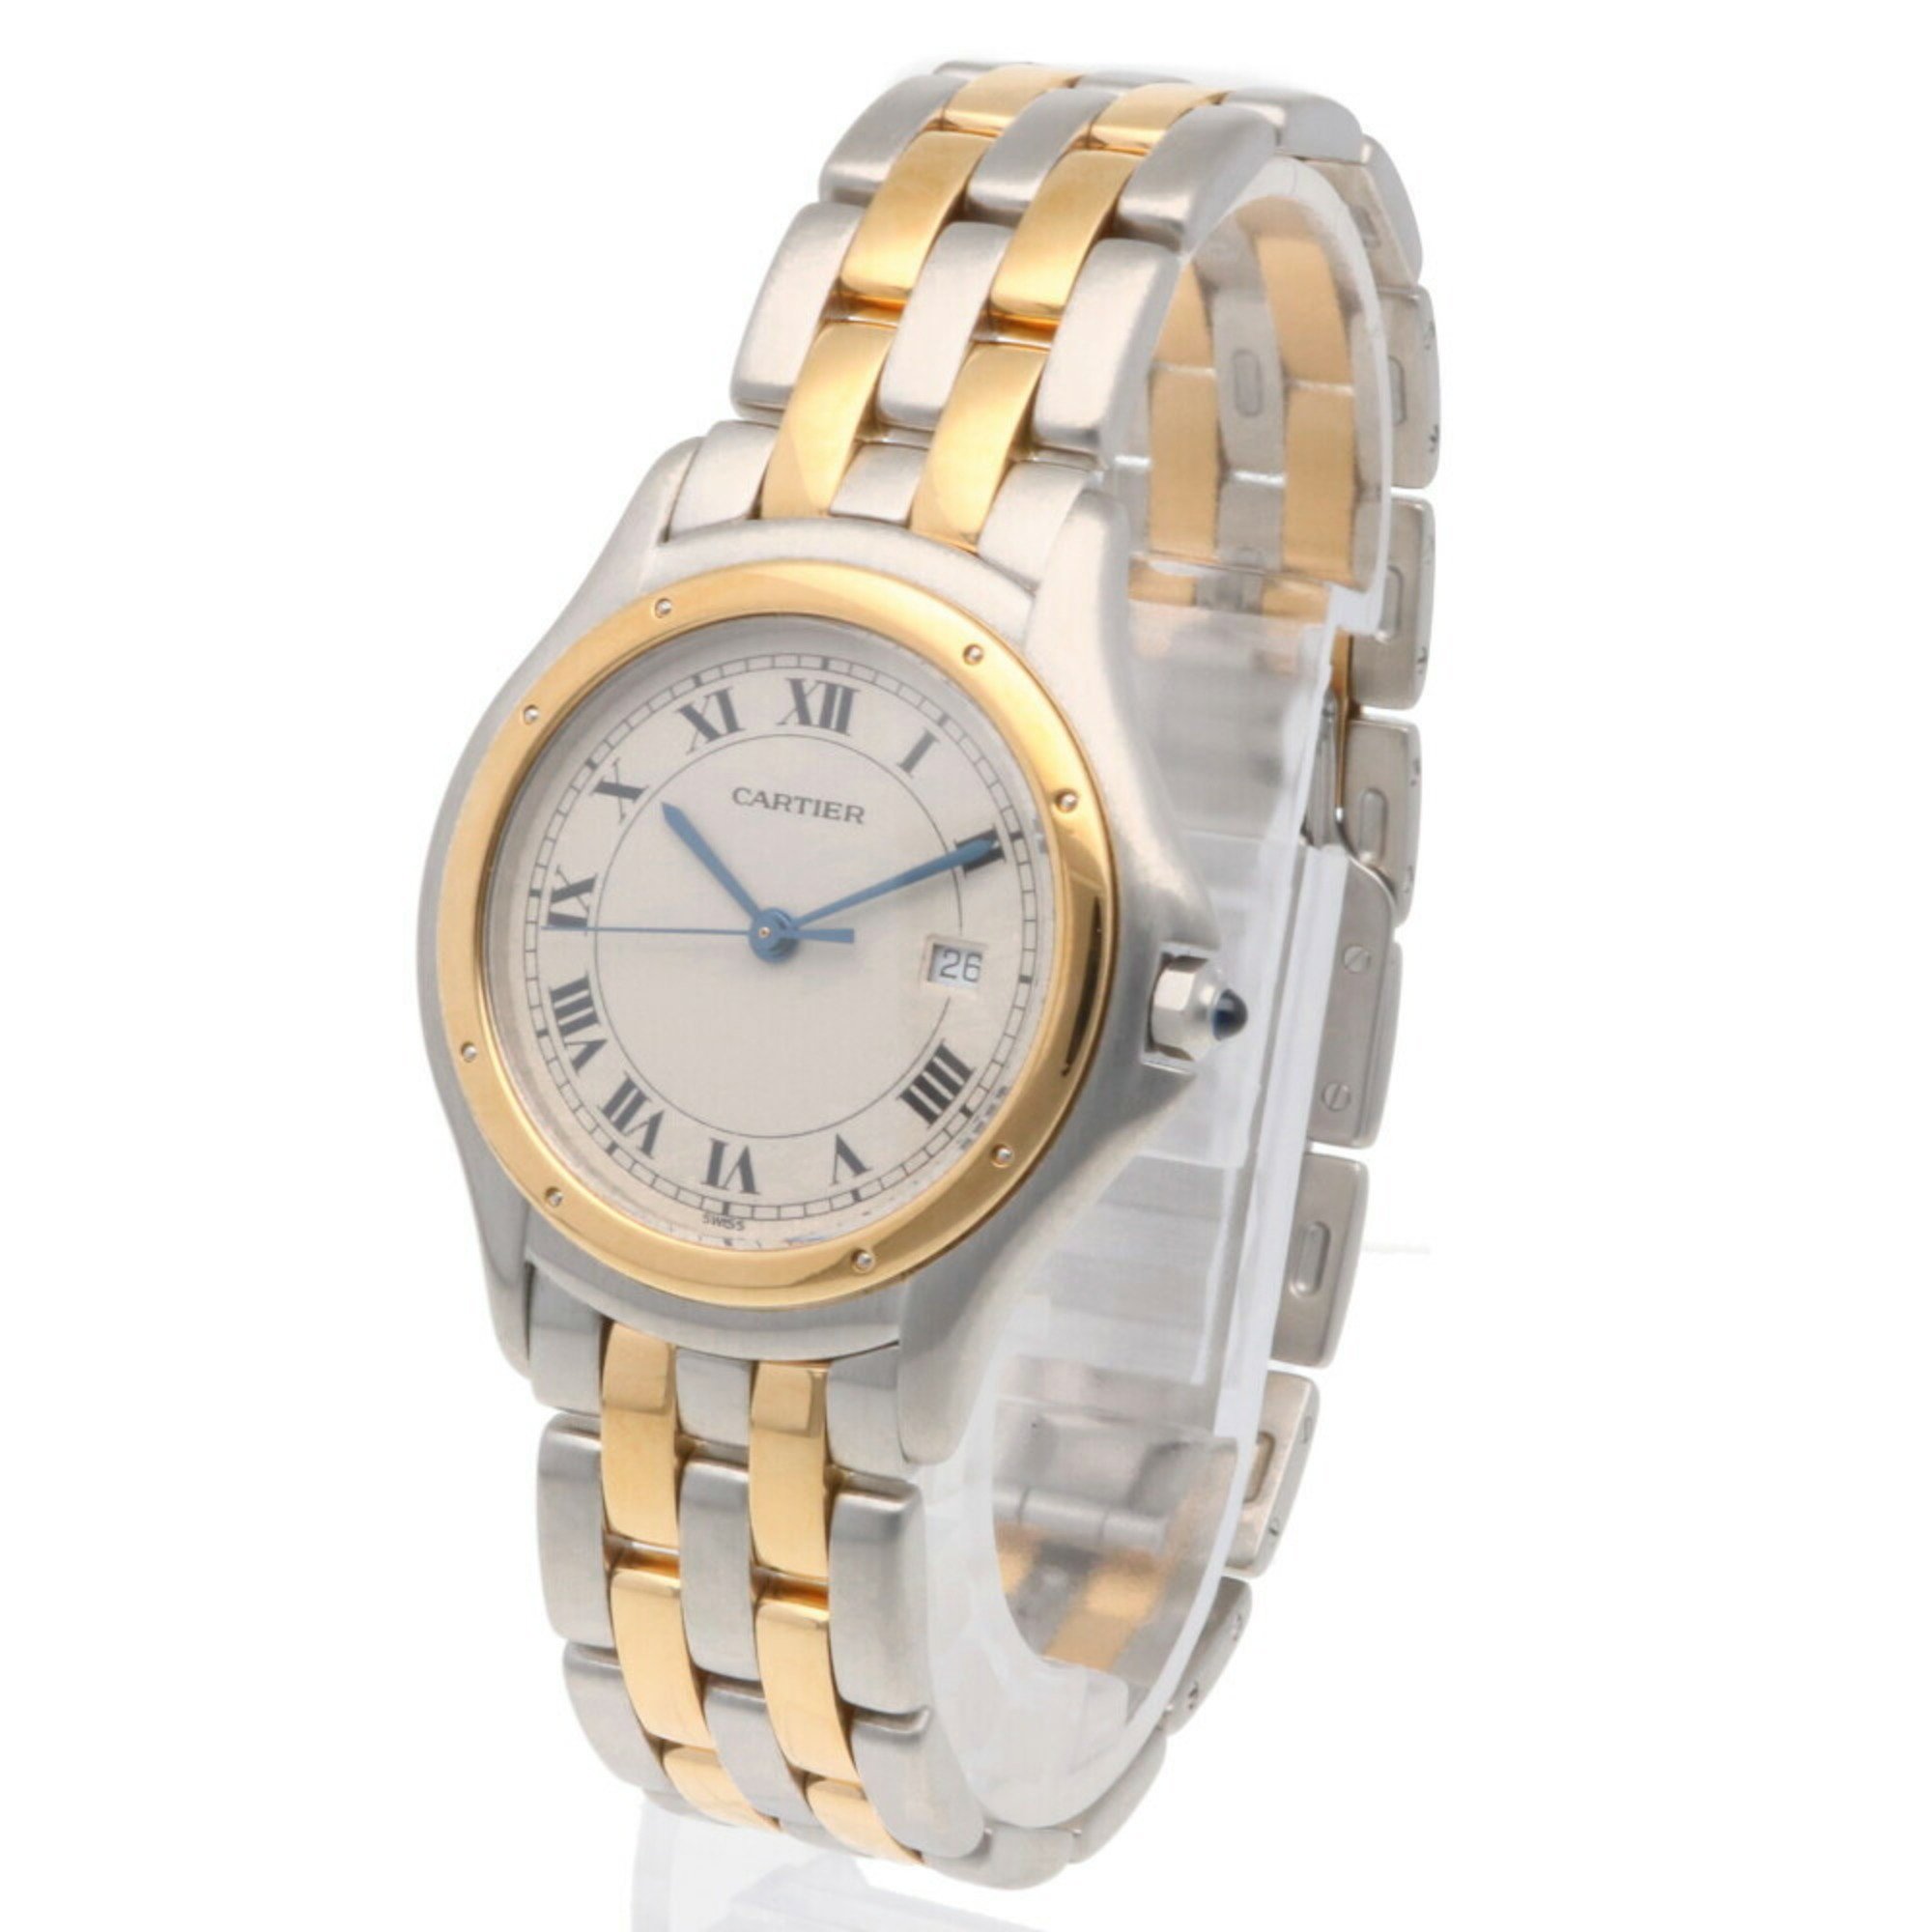 Cartier Panthère Round Watch Stainless Steel 1874904 Quartz Unisex CARTIER Wake-up Product Non-Waterproof